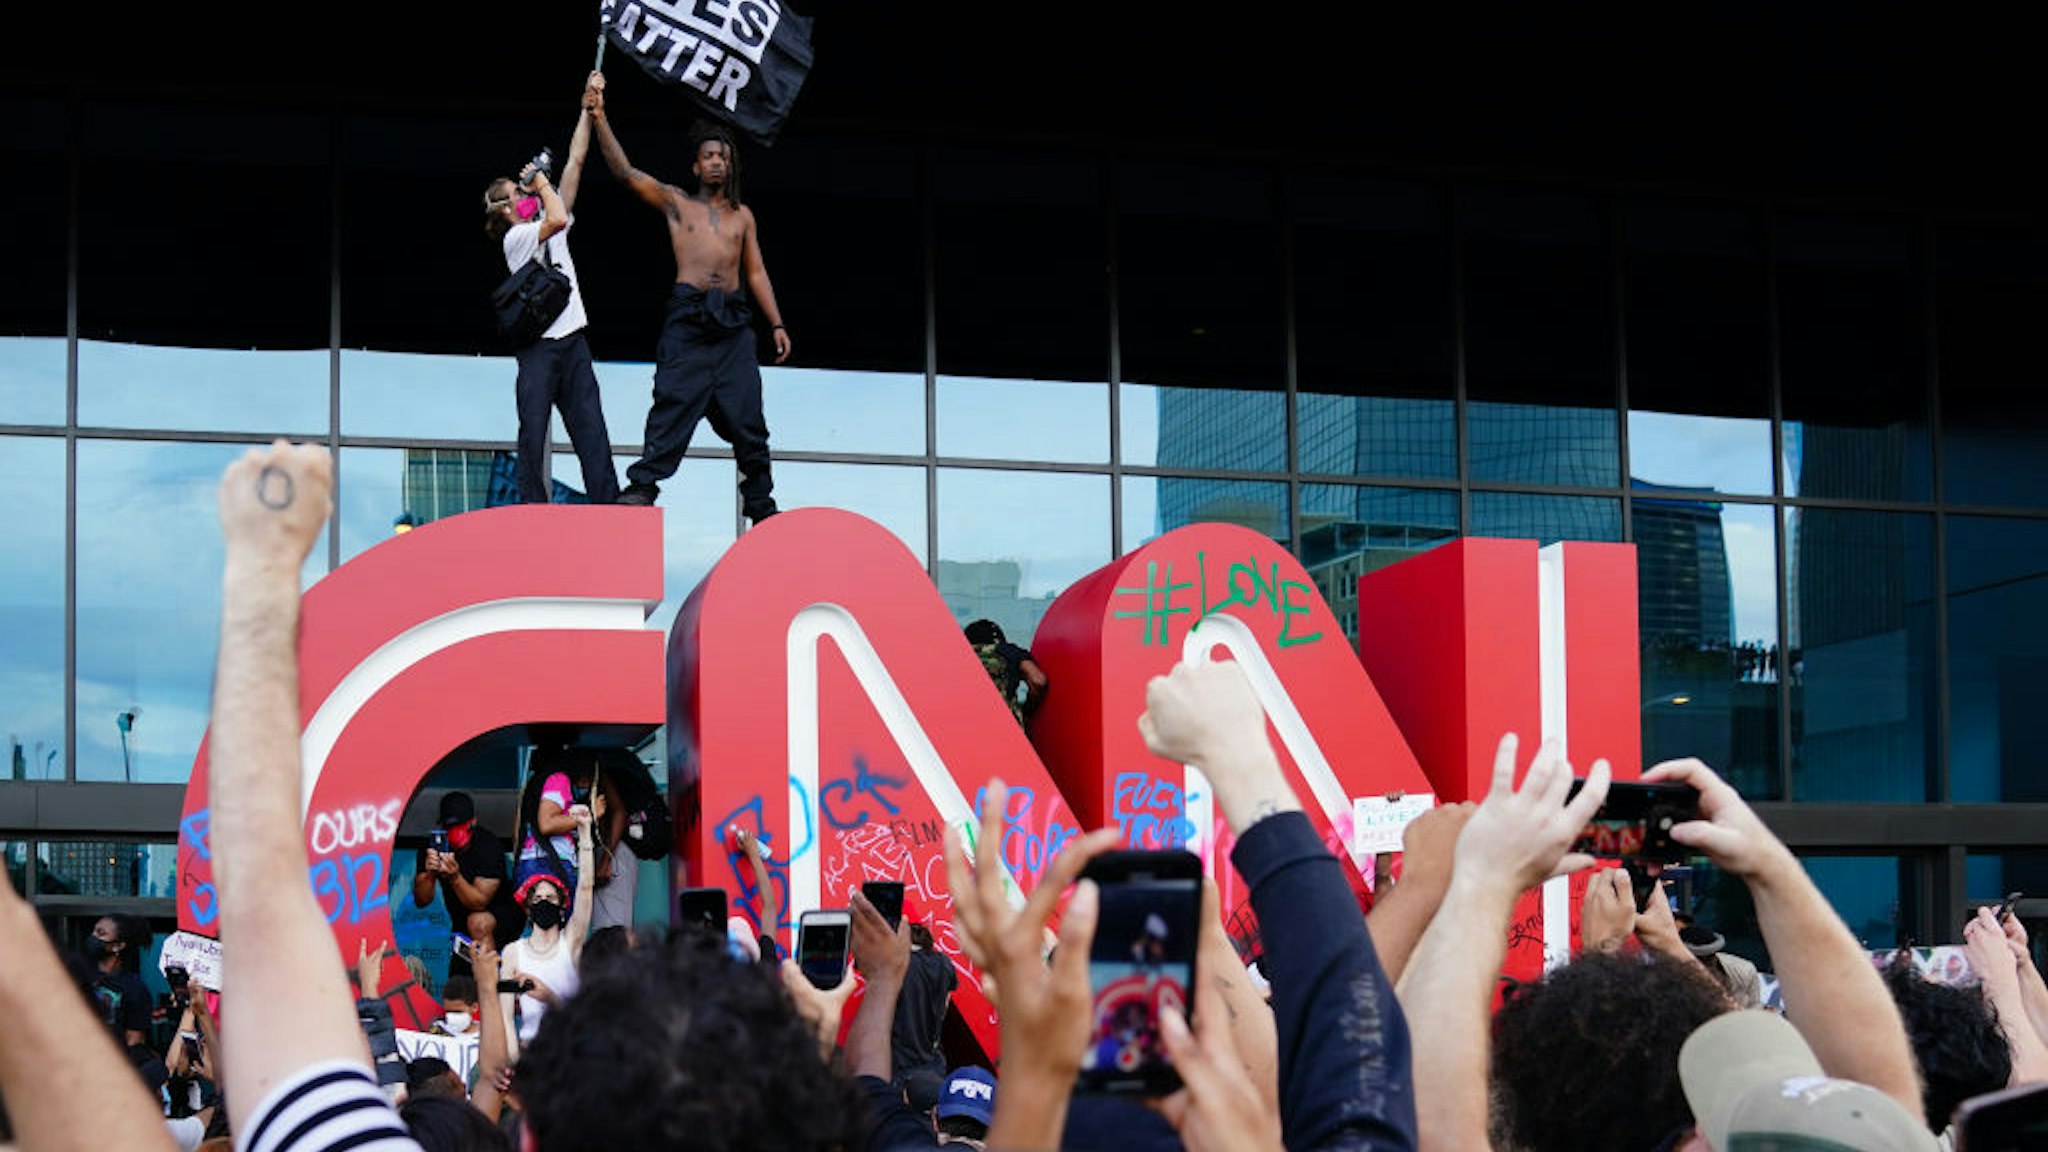 A man waves a Black Lives Matter flag atop the CNN logo during a protest in response to the police killing of George Floyd outside the CNN Center on May 29, 2020 in Atlanta, Georgia.